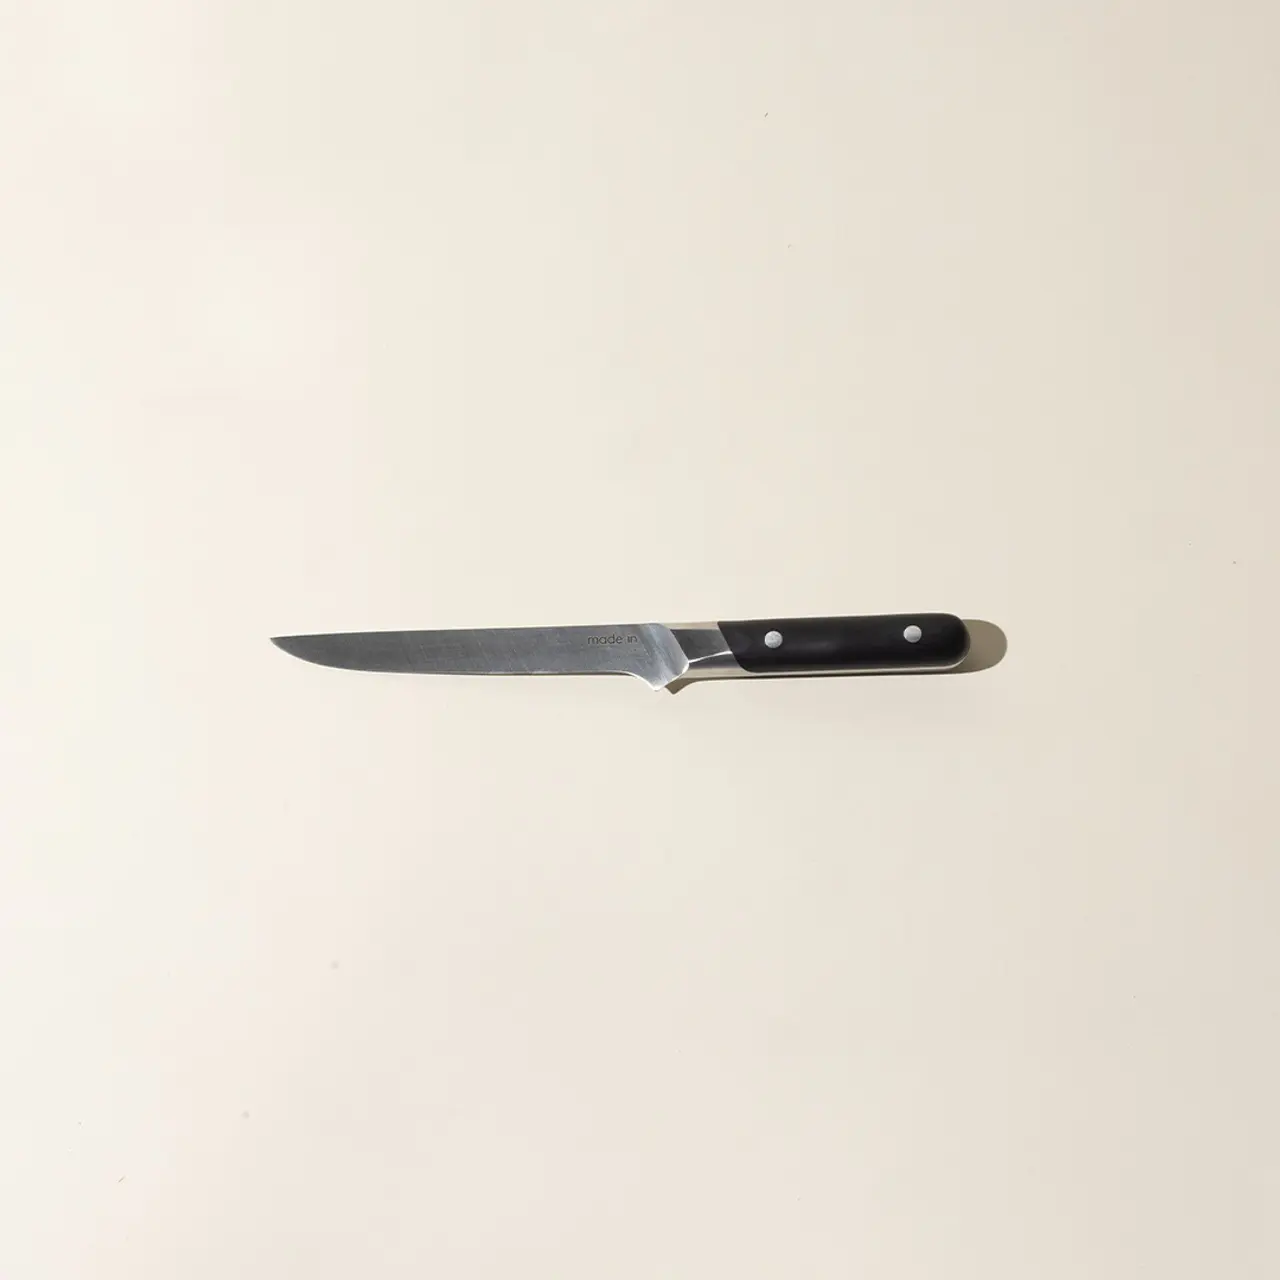 A single kitchen knife with a black handle is centered on a plain light-colored background.